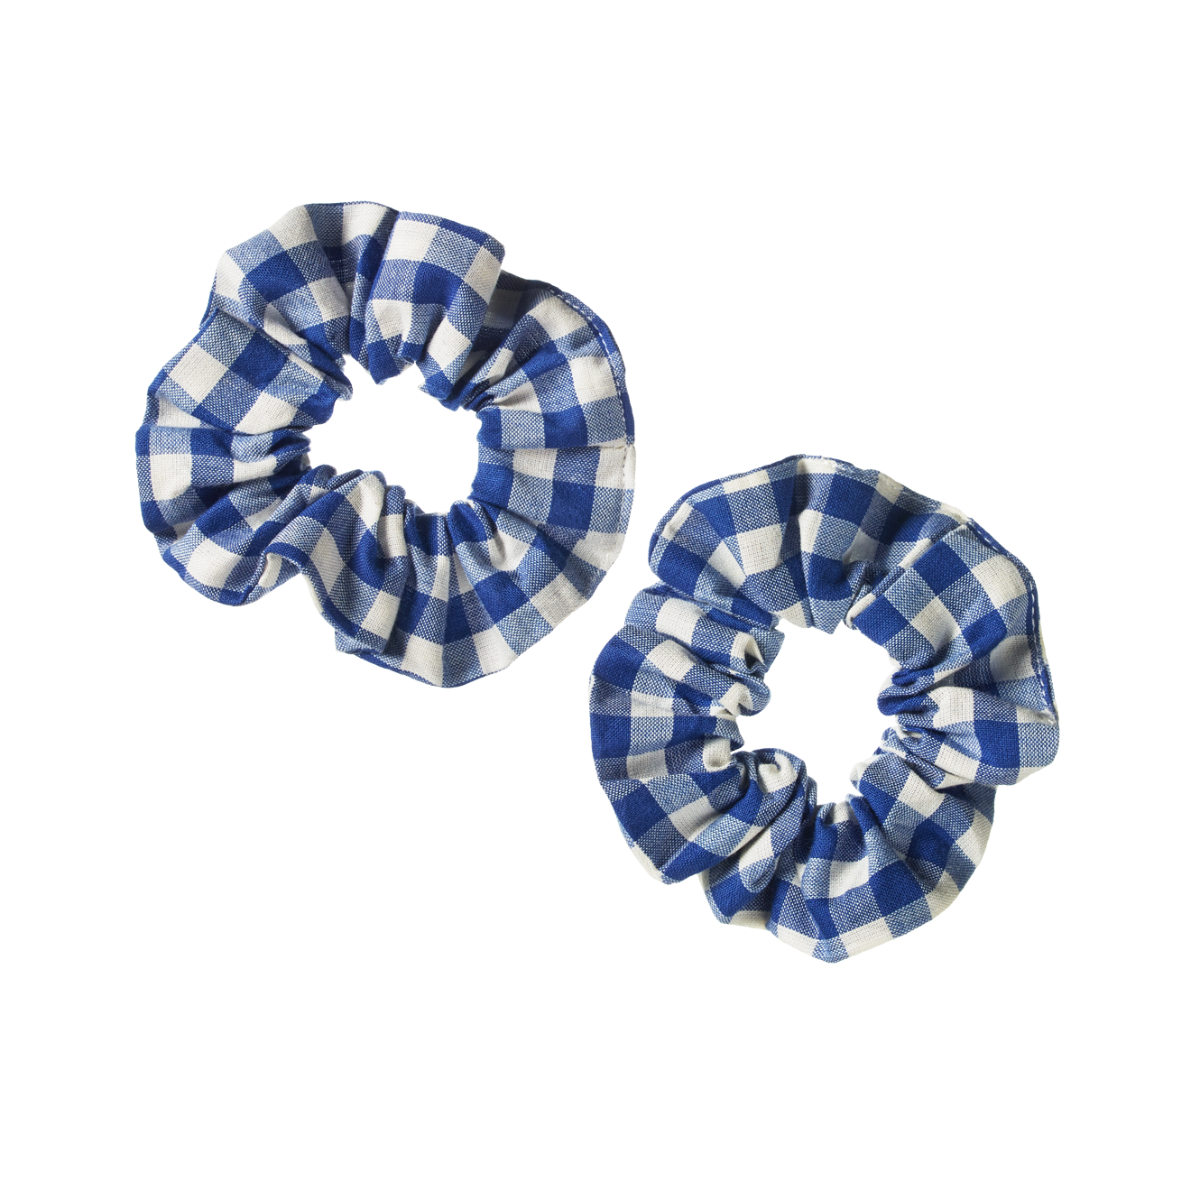 Nature Baby Scrunchies - Isle Blue Check